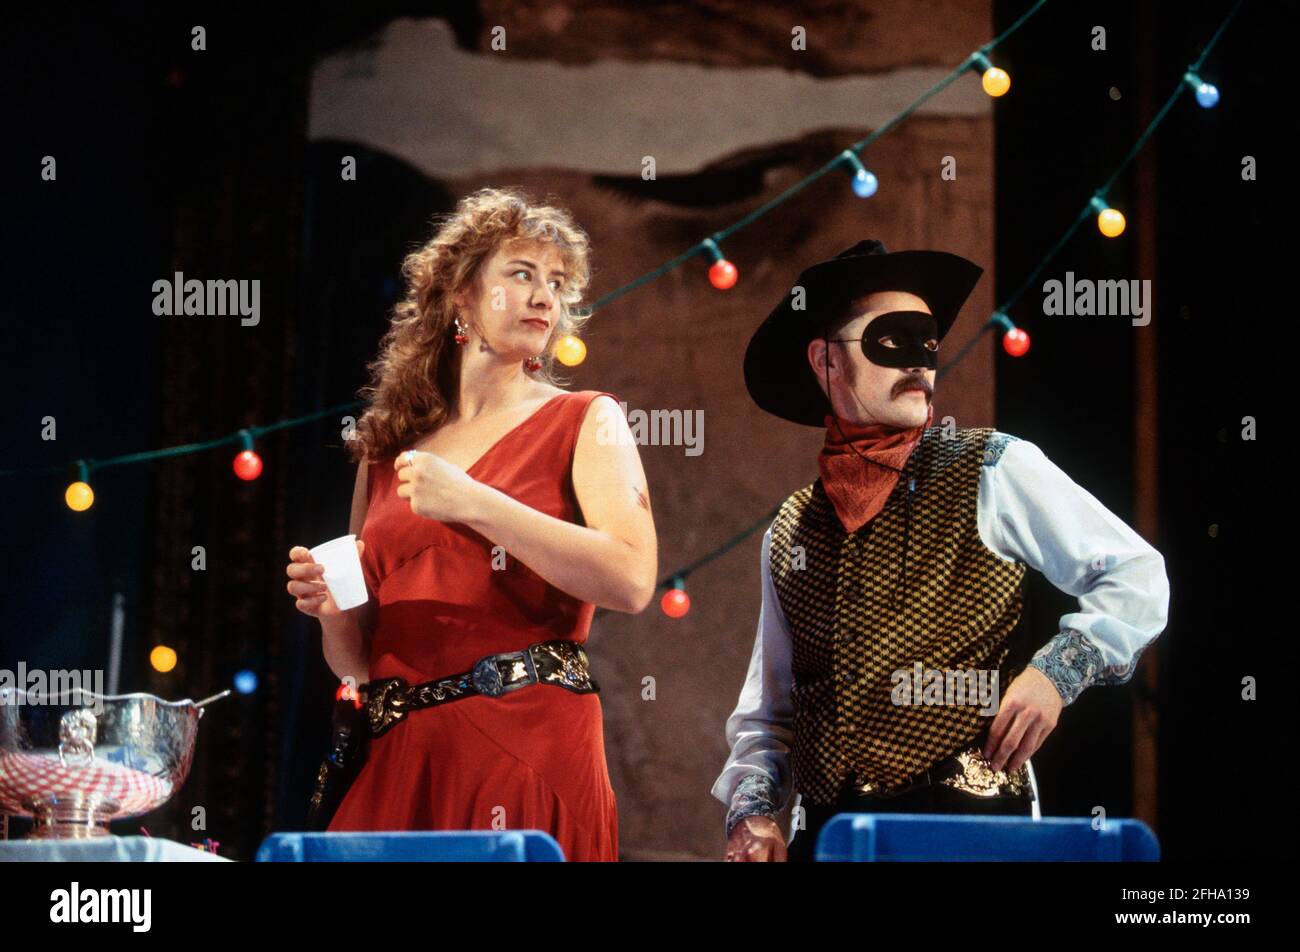 Janet McTeer (Beatrice), Mark Rylance (Benedick) in MUCH ADO ABOUT NOTHING by Shakespeare at the Queen's Theatre, London W1 06/07/1993  design: Neil Warmington  lighting: Rick Fisher  director: Matthew Warchus Stock Photo